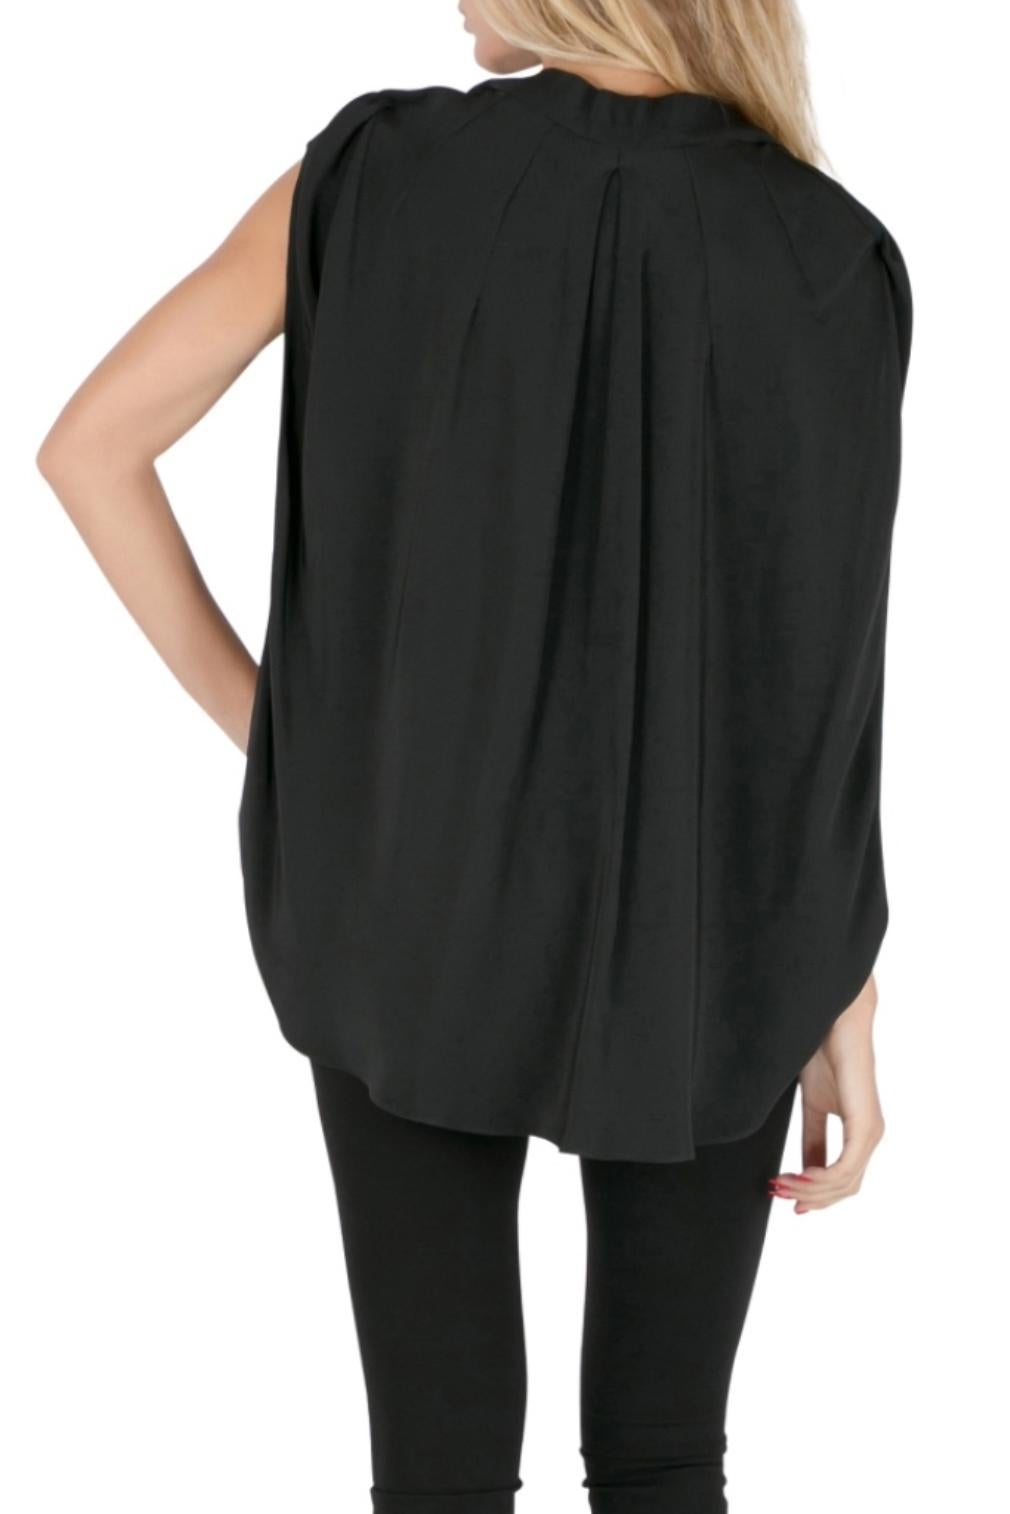 Break the monotonous everyday look with this unique draped front top. The creation of Oscar De La Renta is tailored from smooth silk and comes in black color that will complement any bottoms you team with it. The sleeveless top has a pleated detail